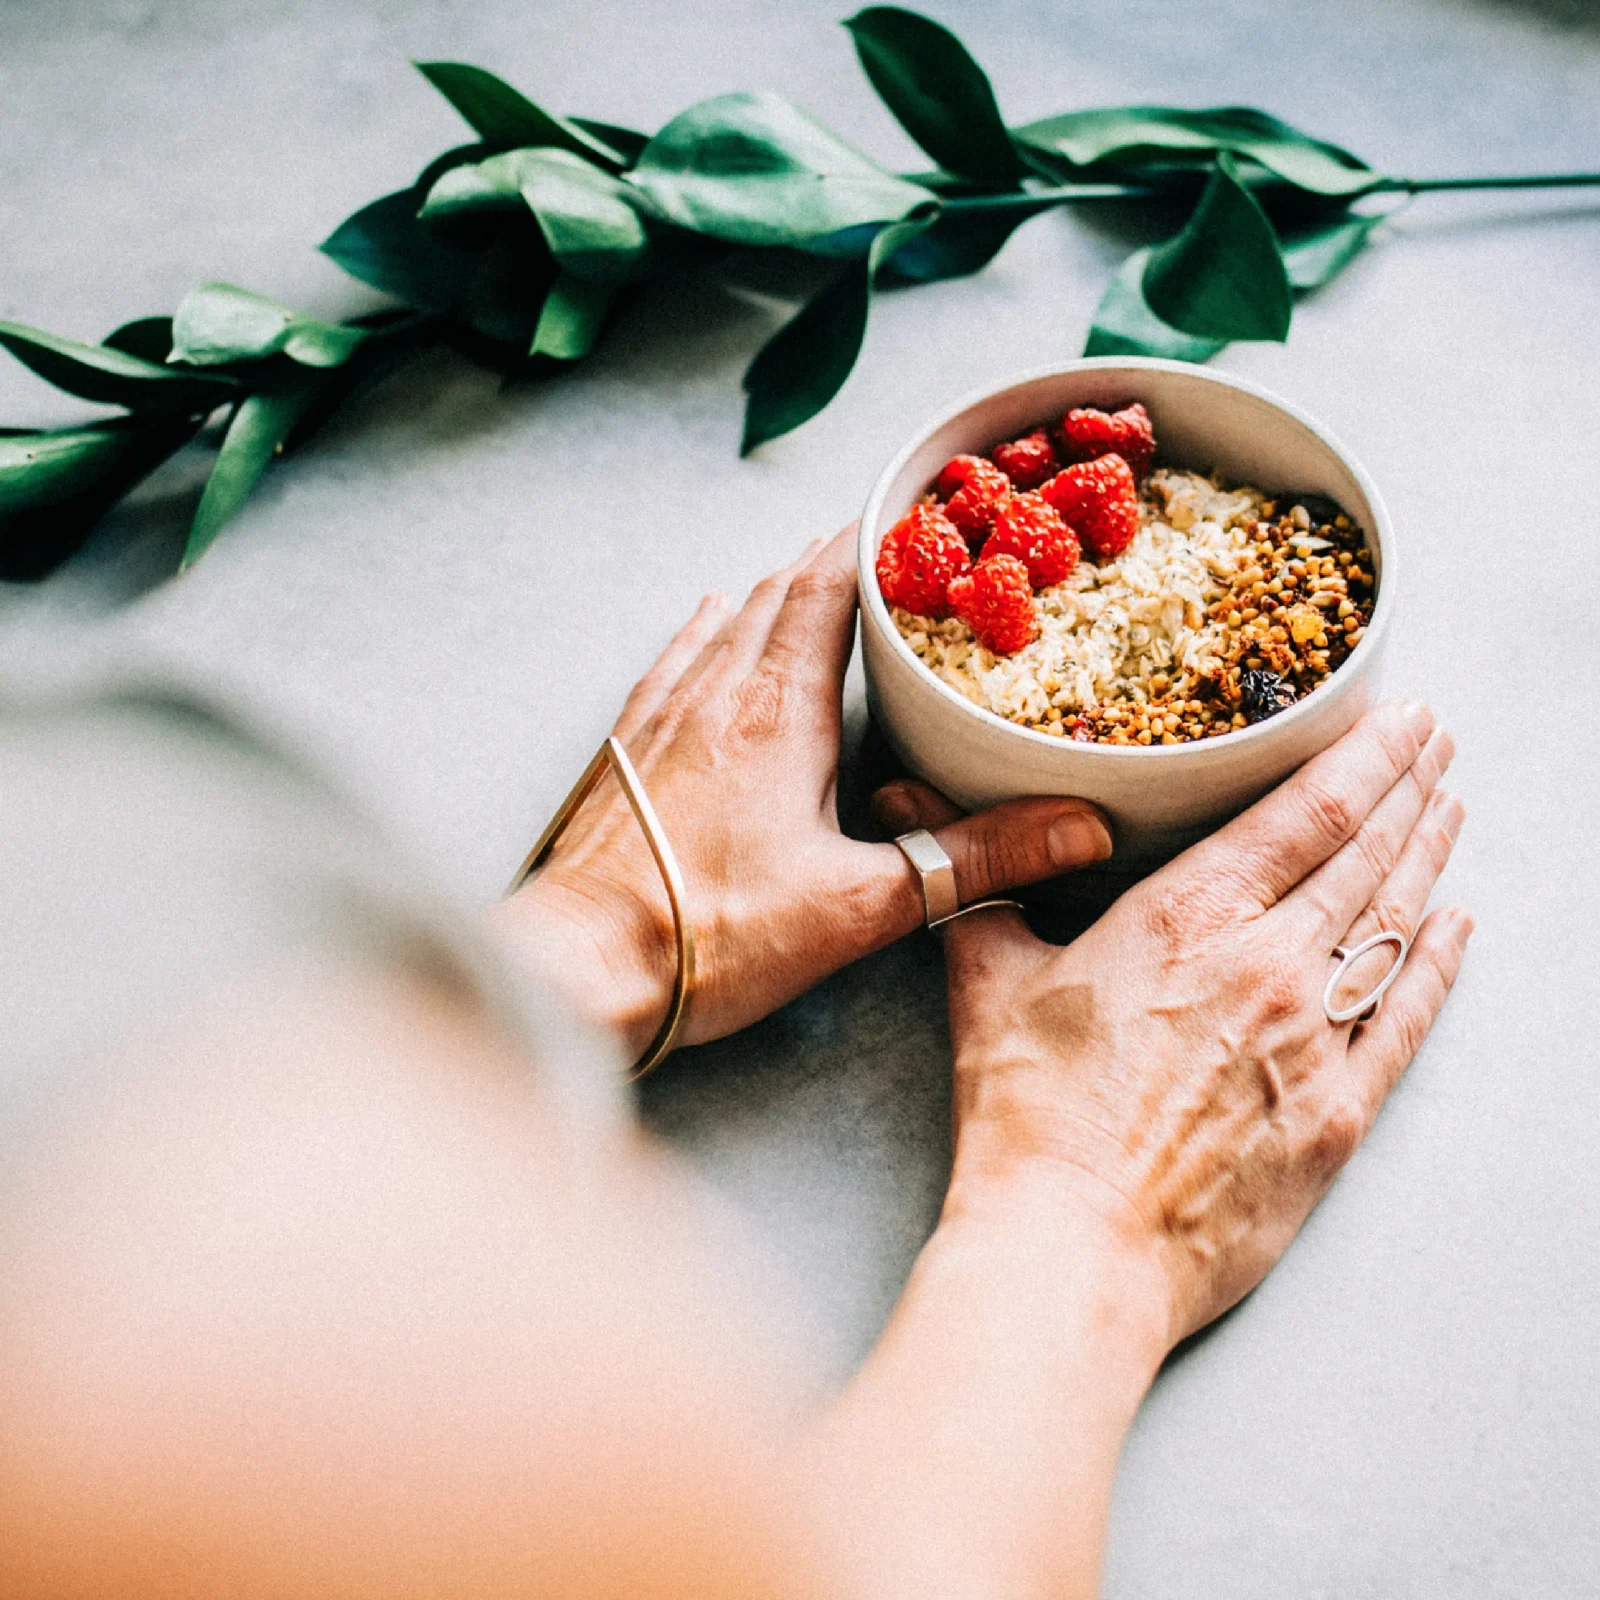 A person holding a bowl of granola topped with raspberries on a gray surface, flanked by green leaves, showcasing a minimalist aesthetic designed by a design agency in Wales.